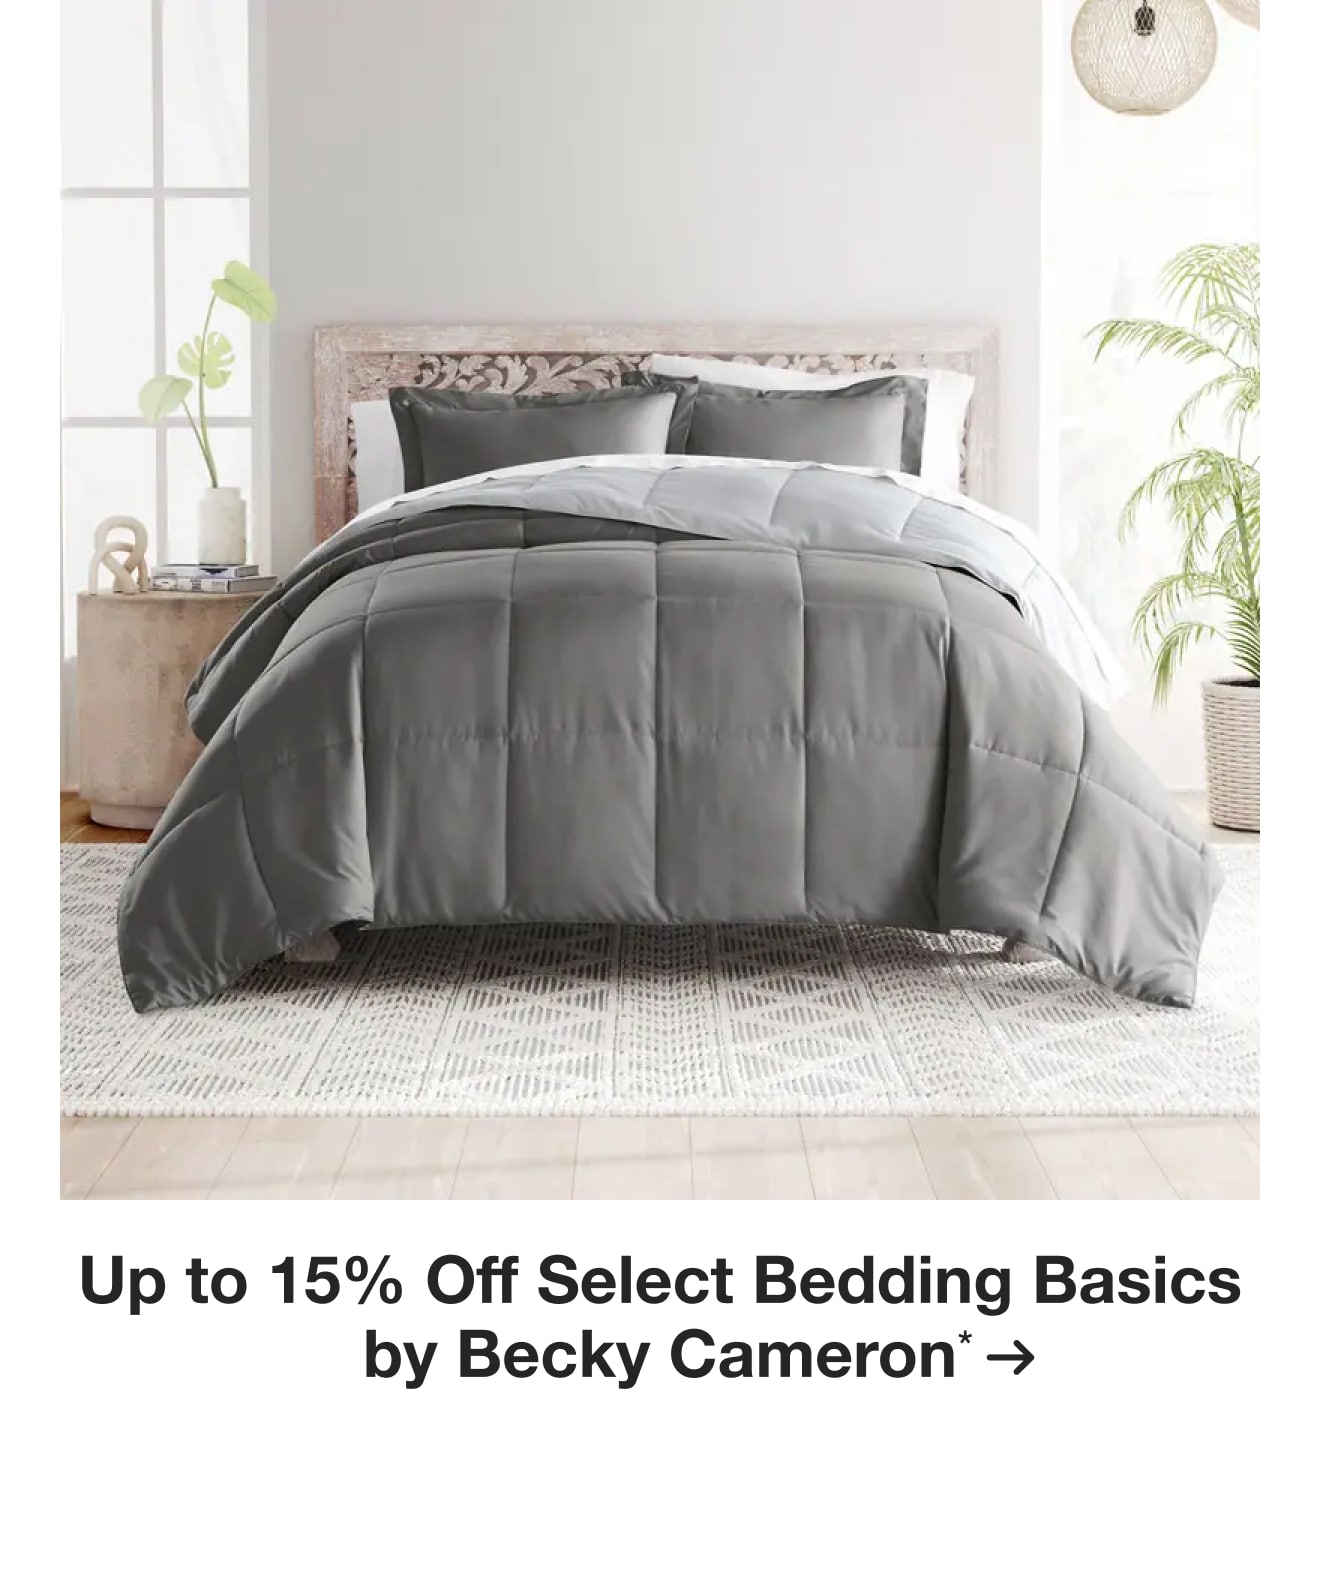 Up to 15% Select Bedding Basics by Becky Cameron*